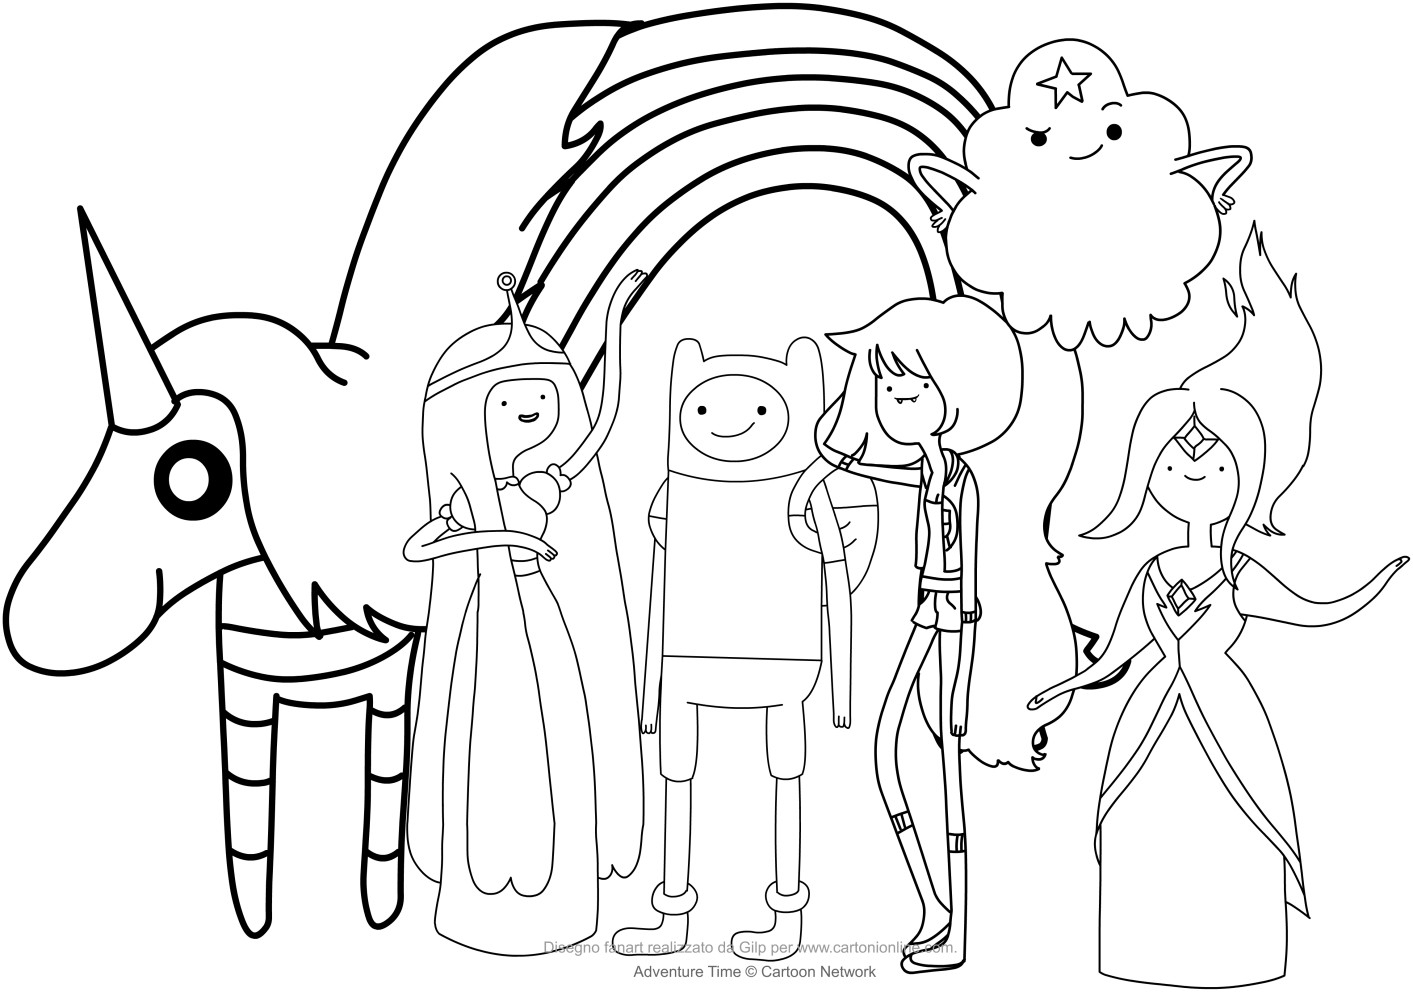 Cartoon Network Coloring Pages To Print Coloring Ideas Finn And Jake Coloring Pages Ideas At Getdrawings